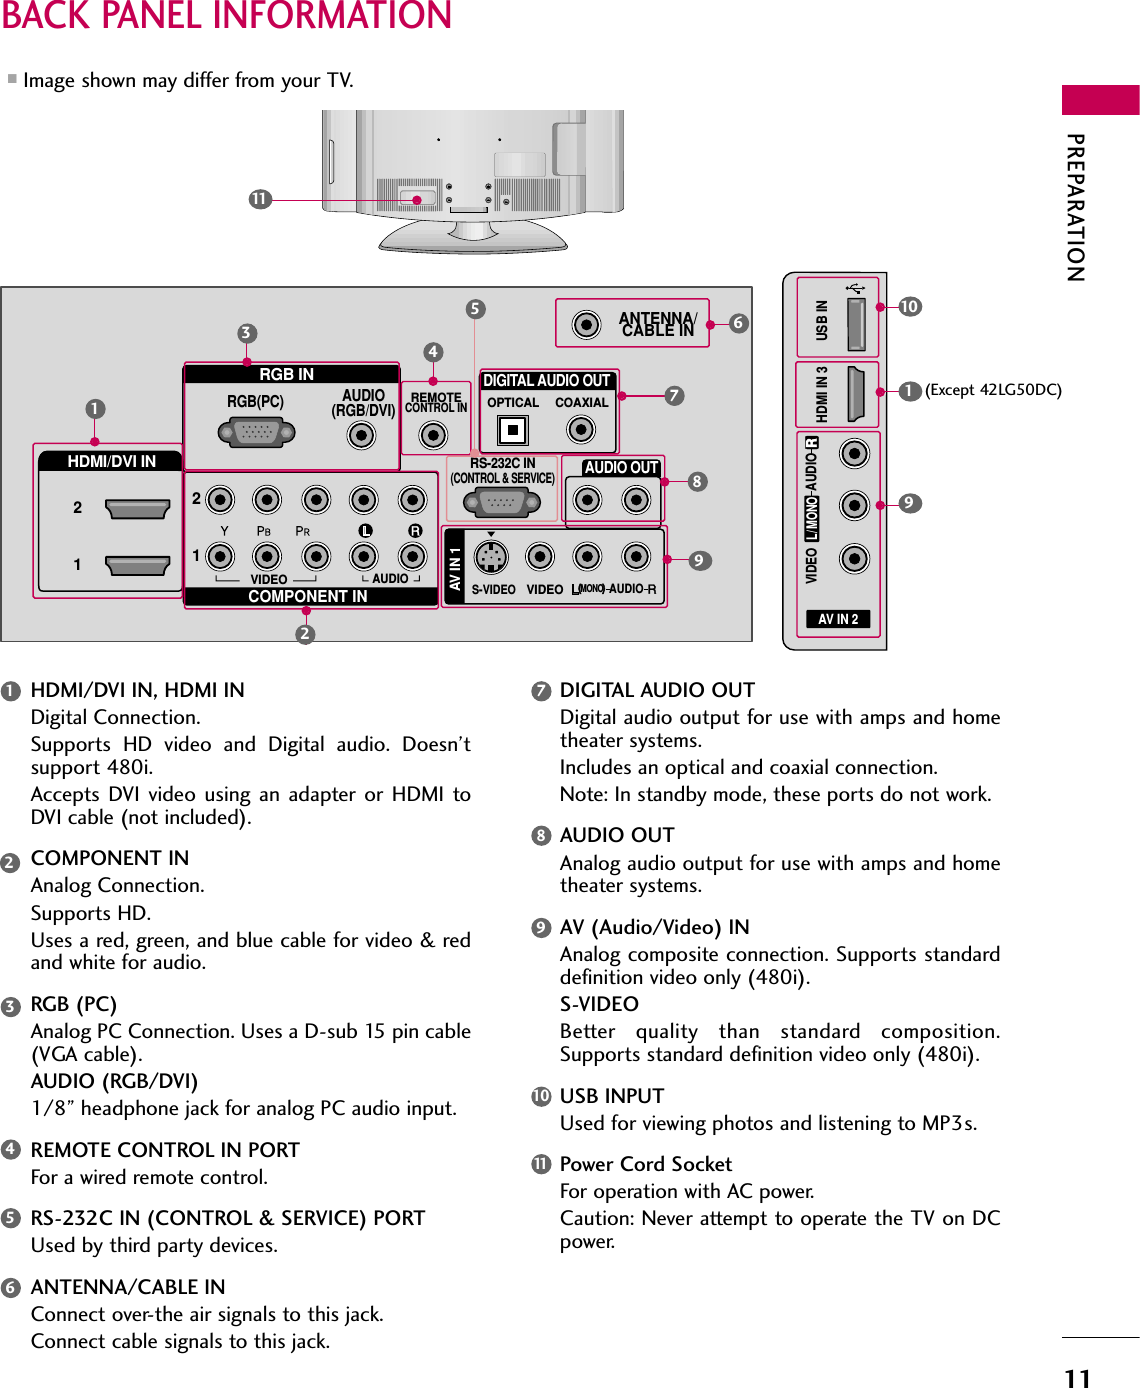 PREPARATION11BACK PANEL INFORMATION■Image shown may differ from your TV.AV IN 2L/MONORAUDIOVIDEOHDMI IN 3 USB IN(            )RGB INCOMPONENT INAUDIO(RGB/DVI)RGB(PC)REMOTECONTROL INANTENNA/CABLE IN12RS-232C IN(CONTROL &amp; SERVICE)VIDEOAUDIOOPTICAL COAXIALDIGITAL AUDIO OUTAUDIO OUTAV IN 1RHDMI/DVI IN 21VIDEOMONO(            )AUDIOS-VIDEO1346782951R(            )11HDMI/DVI IN, HDMI INDigital Connection. Supports  HD  video  and  Digital  audio.  Doesn’tsupport 480i. Accepts  DVI  video using  an  adapter  or  HDMI toDVI cable (not included).COMPONENT INAnalog Connection. Supports HD. Uses a red, green, and blue cable for video &amp; redand white for audio.RGB (PC)Analog PC Connection. Uses a D-sub 15 pin cable(VGA cable).AUDIO (RGB/DVI)1/8” headphone jack for analog PC audio input.REMOTE CONTROL IN PORTFor a wired remote control.RS-232C IN (CONTROL &amp; SERVICE) PORTUsed by third party devices.ANTENNA/CABLE INConnect over-the air signals to this jack.Connect cable signals to this jack.DIGITAL AUDIO OUTDigital audio output for use with amps and hometheater systems. Includes an optical and coaxial connection.Note: In standby mode, these ports do not work.AUDIO OUTAnalog audio output for use with amps and hometheater systems.AV (Audio/Video) INAnalog composite connection. Supports standarddefinition video only (480i).S-VIDEOBetter  quality  than  standard  composition.Supports standard definition video only (480i).USB INPUTUsed for viewing photos and listening to MP3s.Power Cord SocketFor operation with AC power. Caution: Never attempt to operate the TV on DCpower.1234569101178109(Except 42LG50DC)